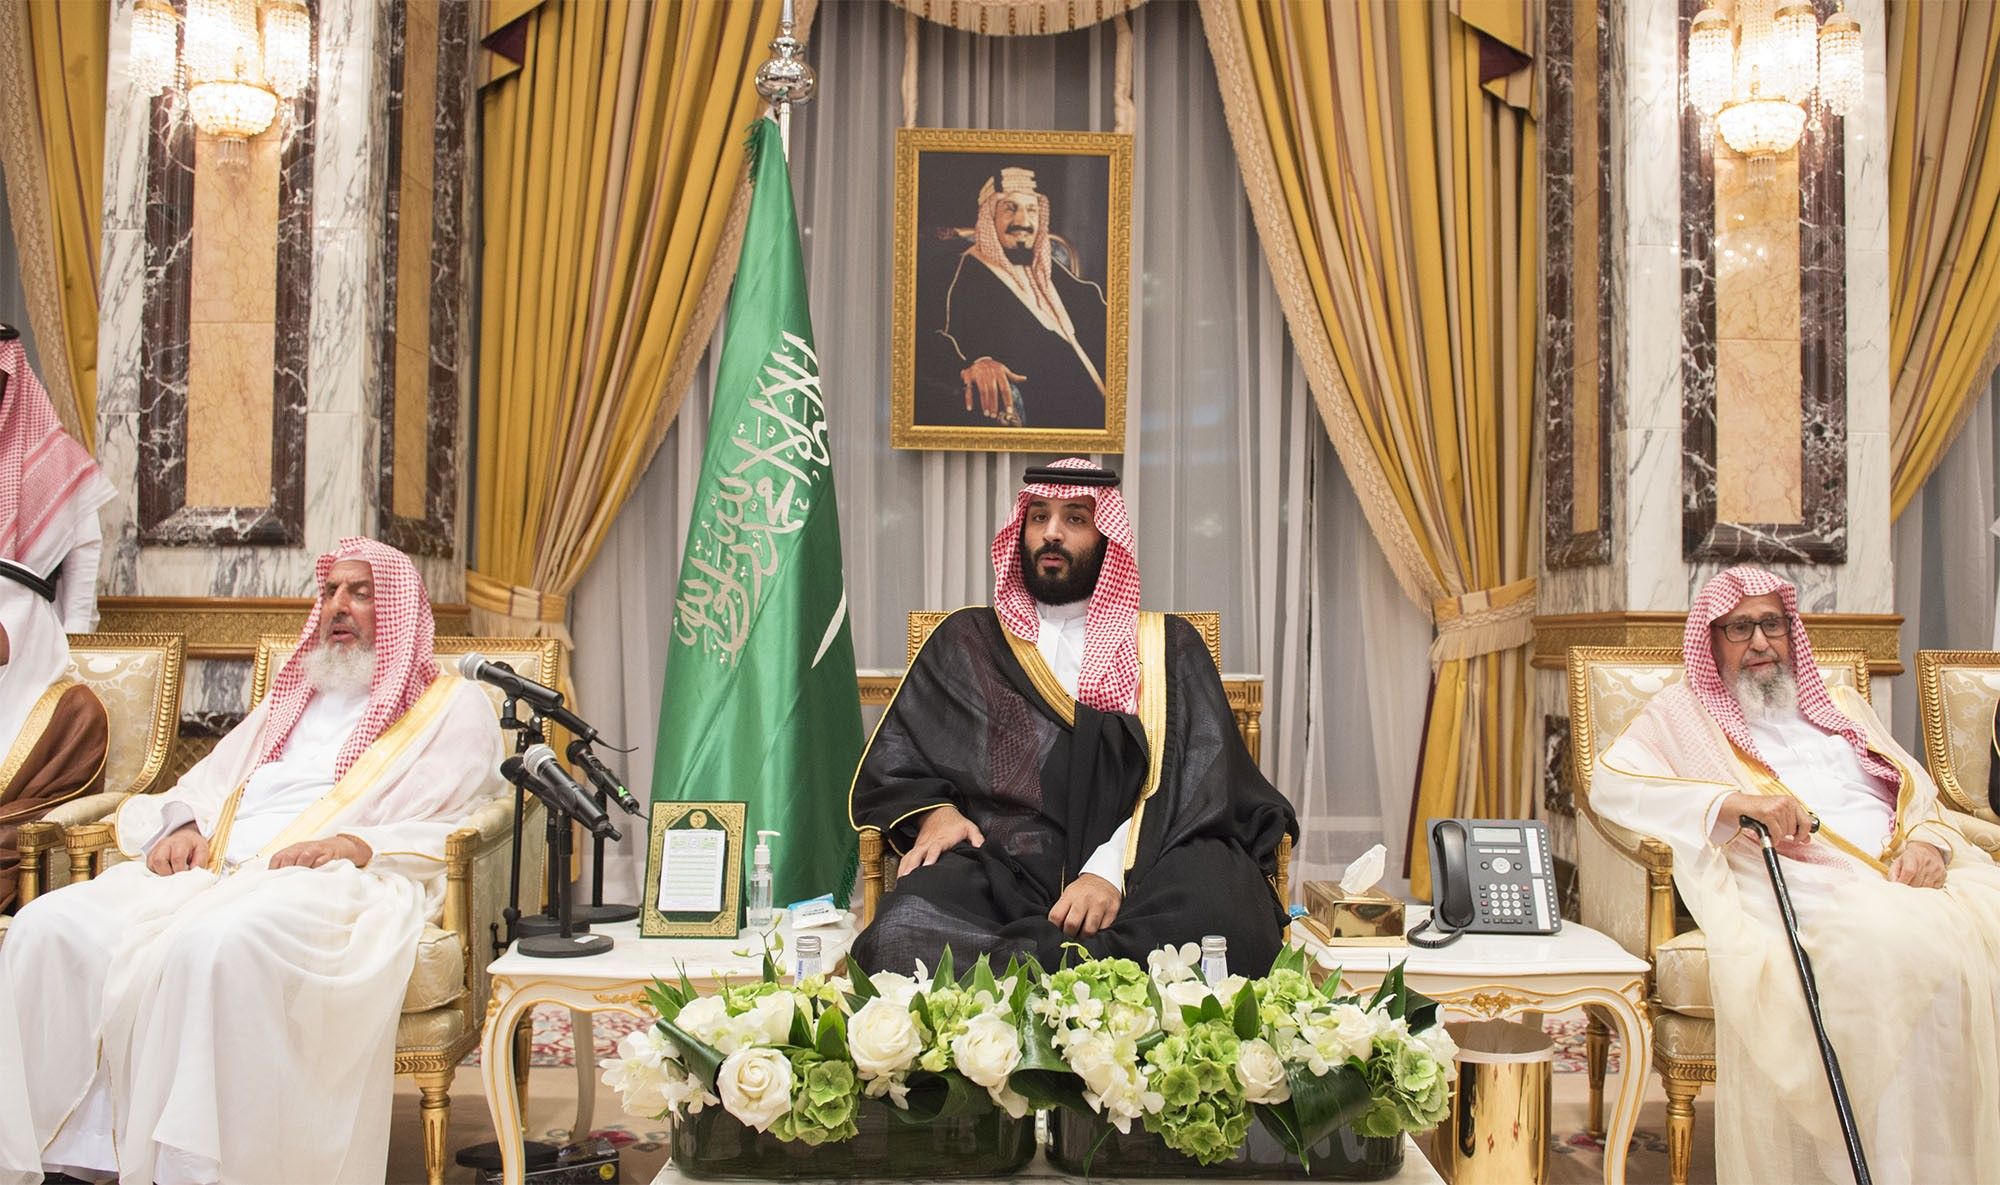 Crown prince Mohammed bin Salman is 'chief of the tribe' in a